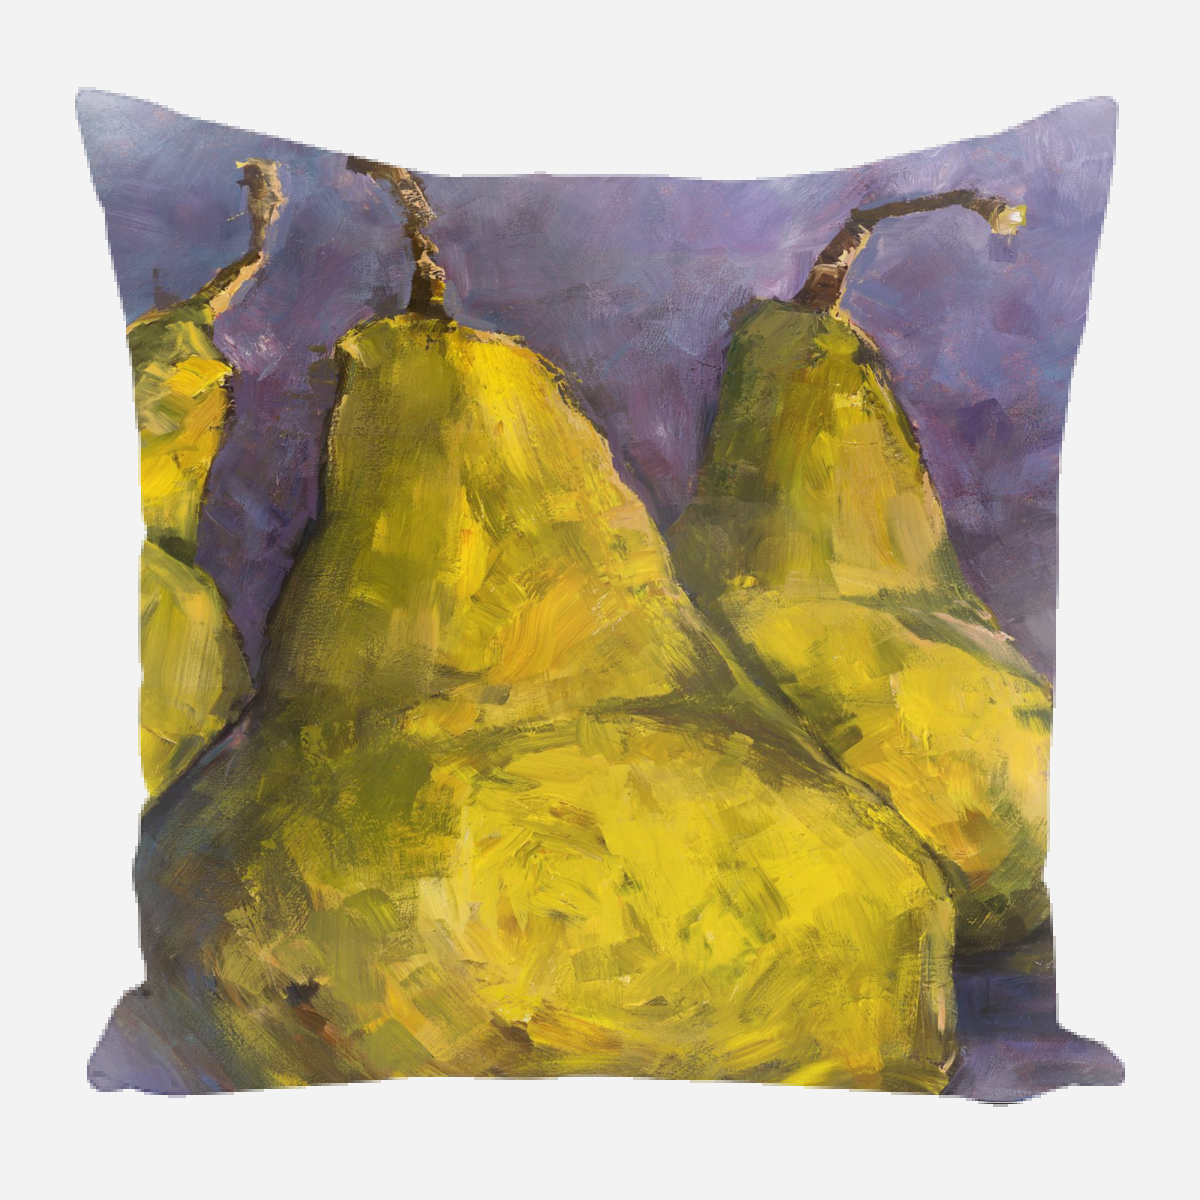 Pears with Purple Pillow